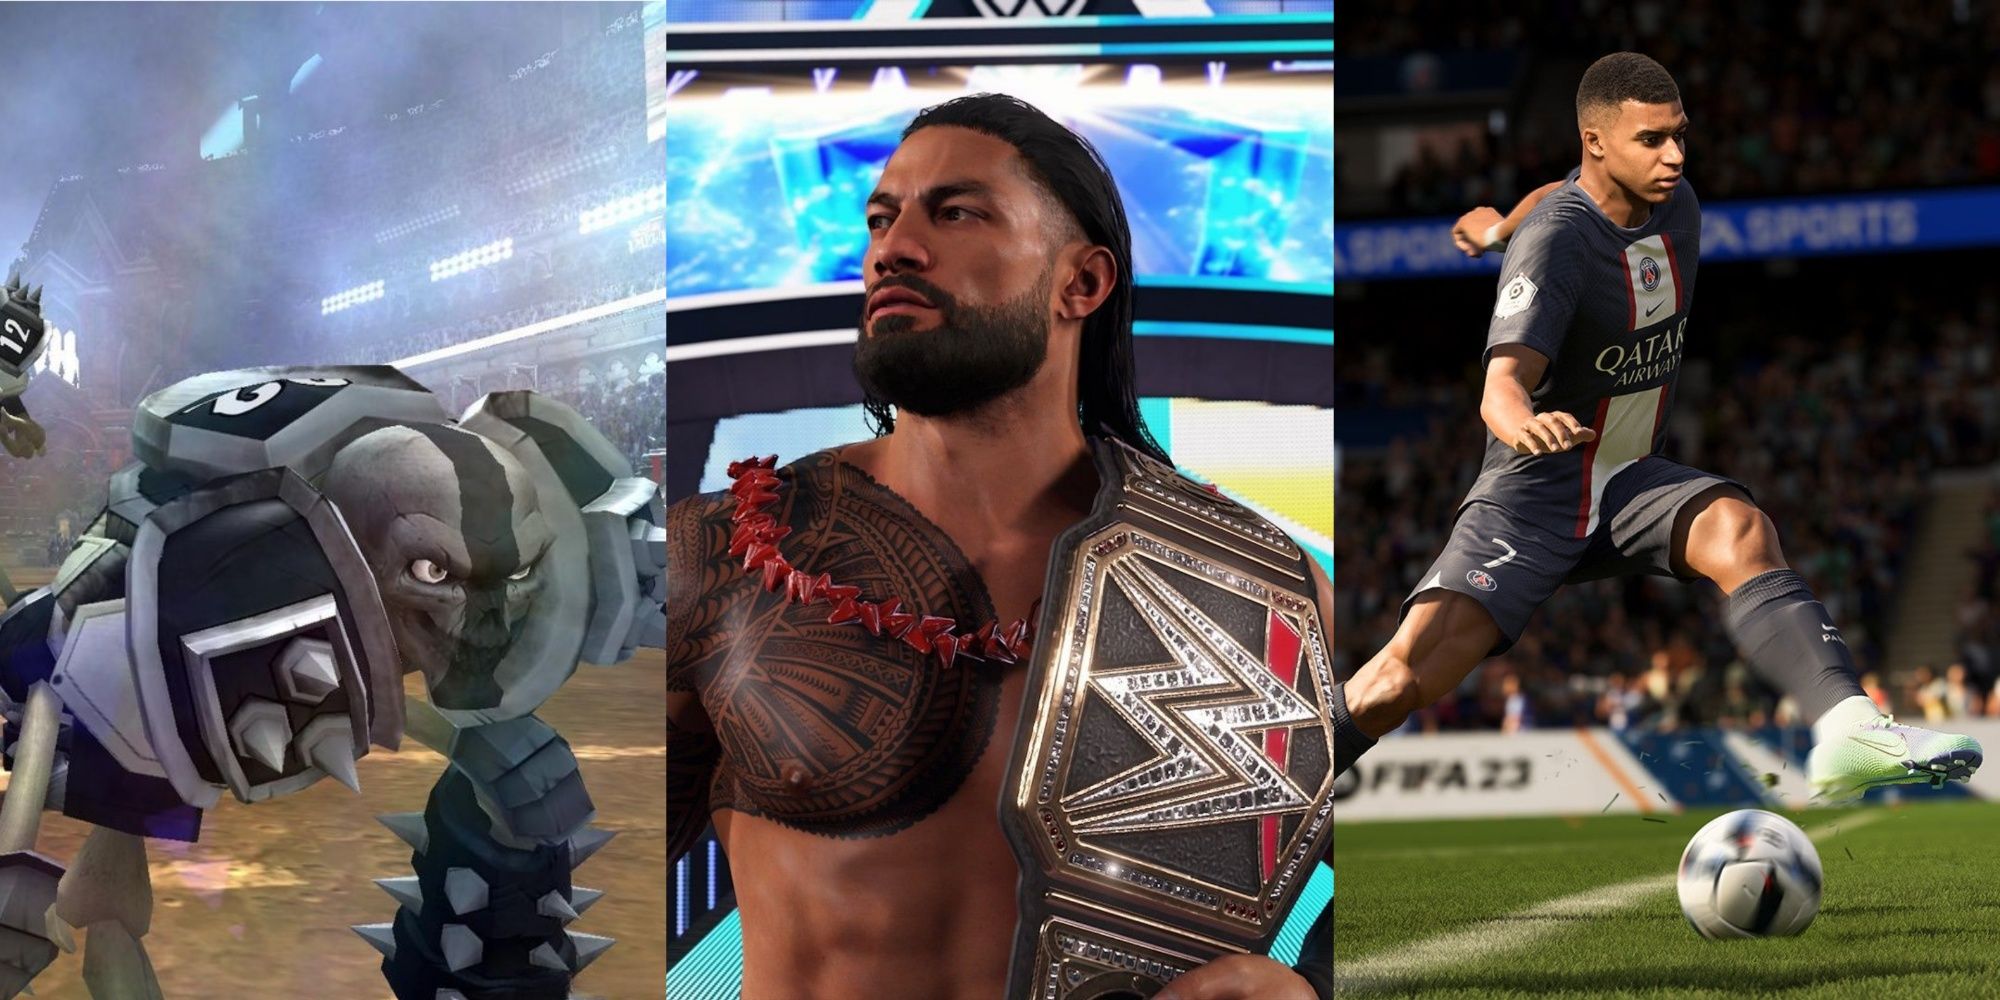 FIFA ft Mbappe on the Ball, WWE ft Roman Reigns, Mutant League ft Skeleton